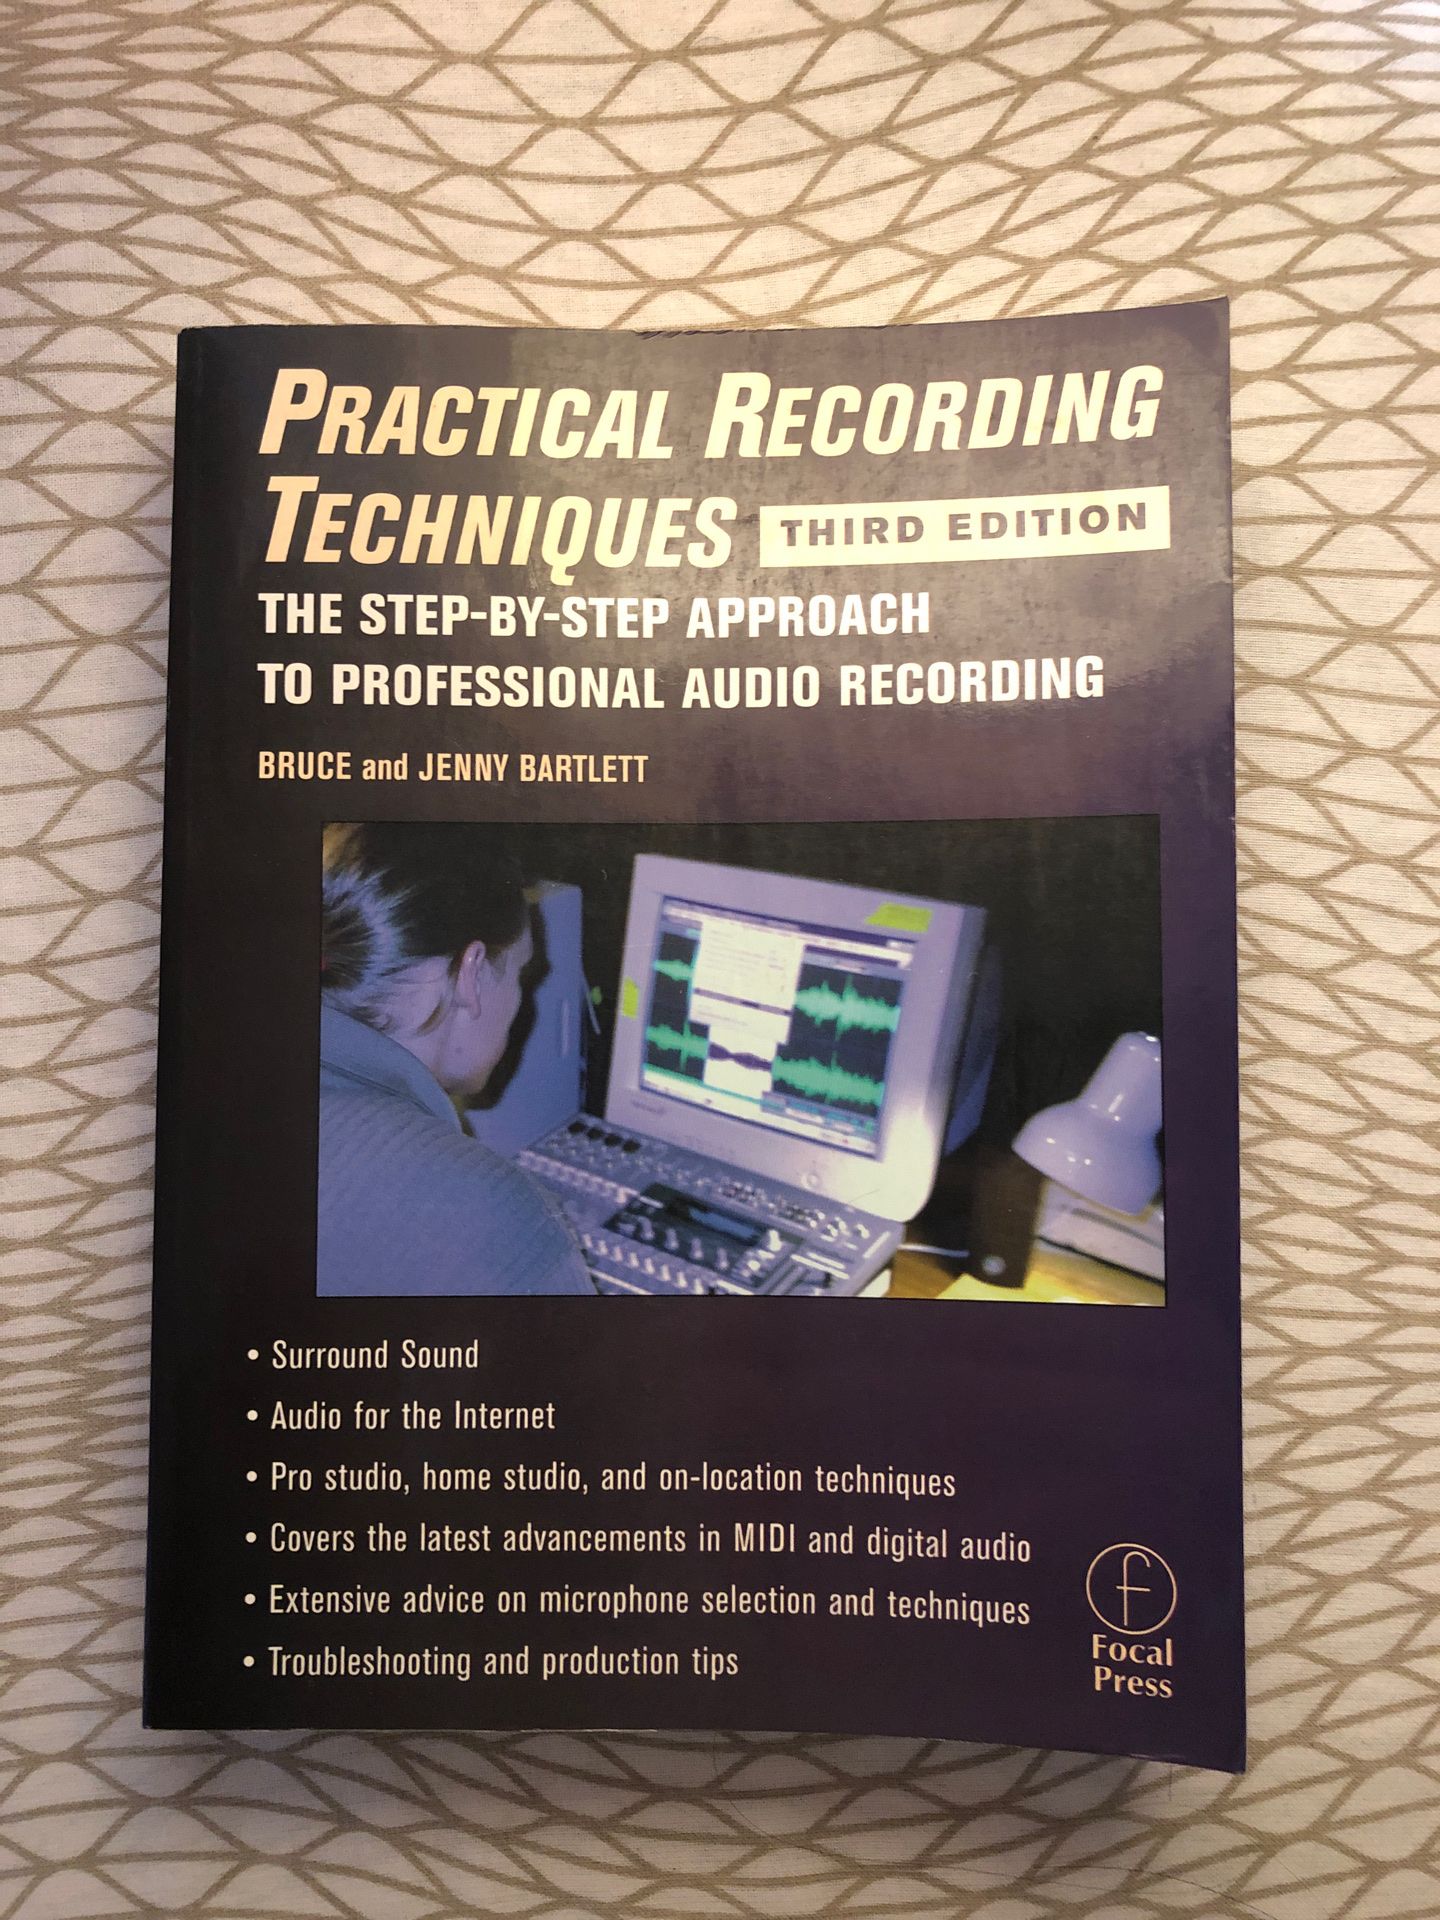 Practice Recording Techniques by Bruce & Jenny Bartlett (Third Edition)